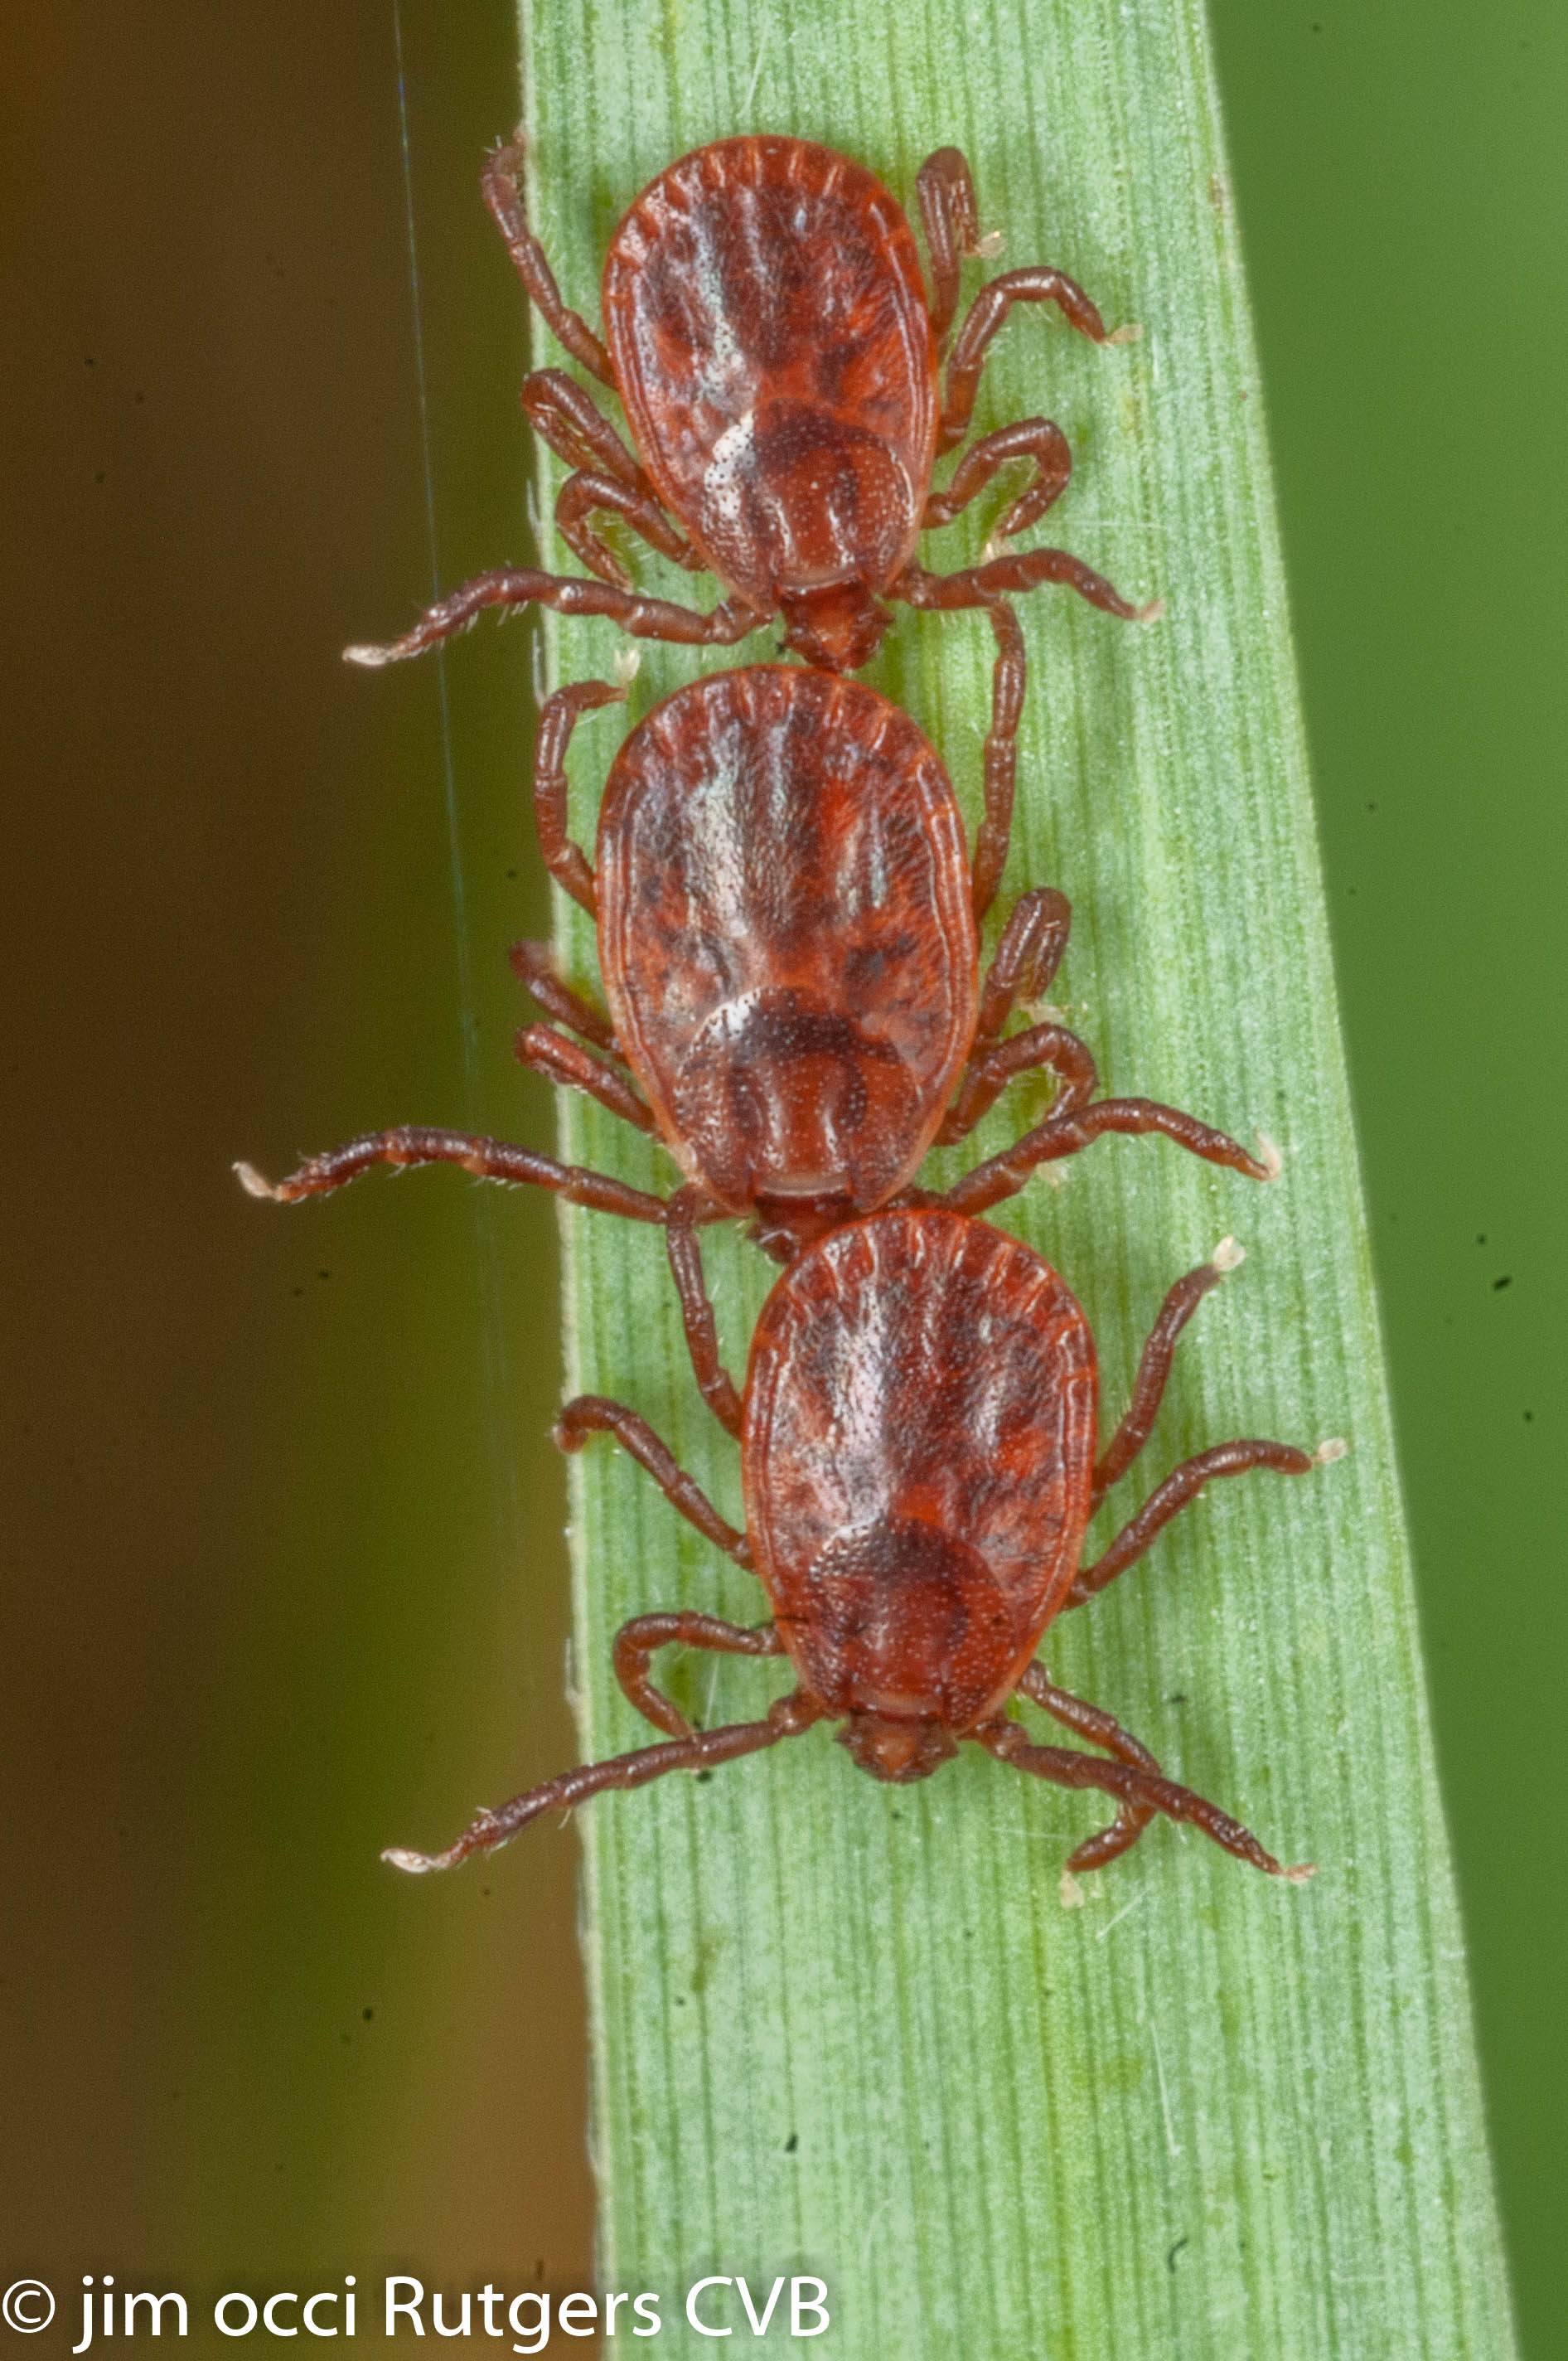 SFTS Virus Outbreak in China from Ticks